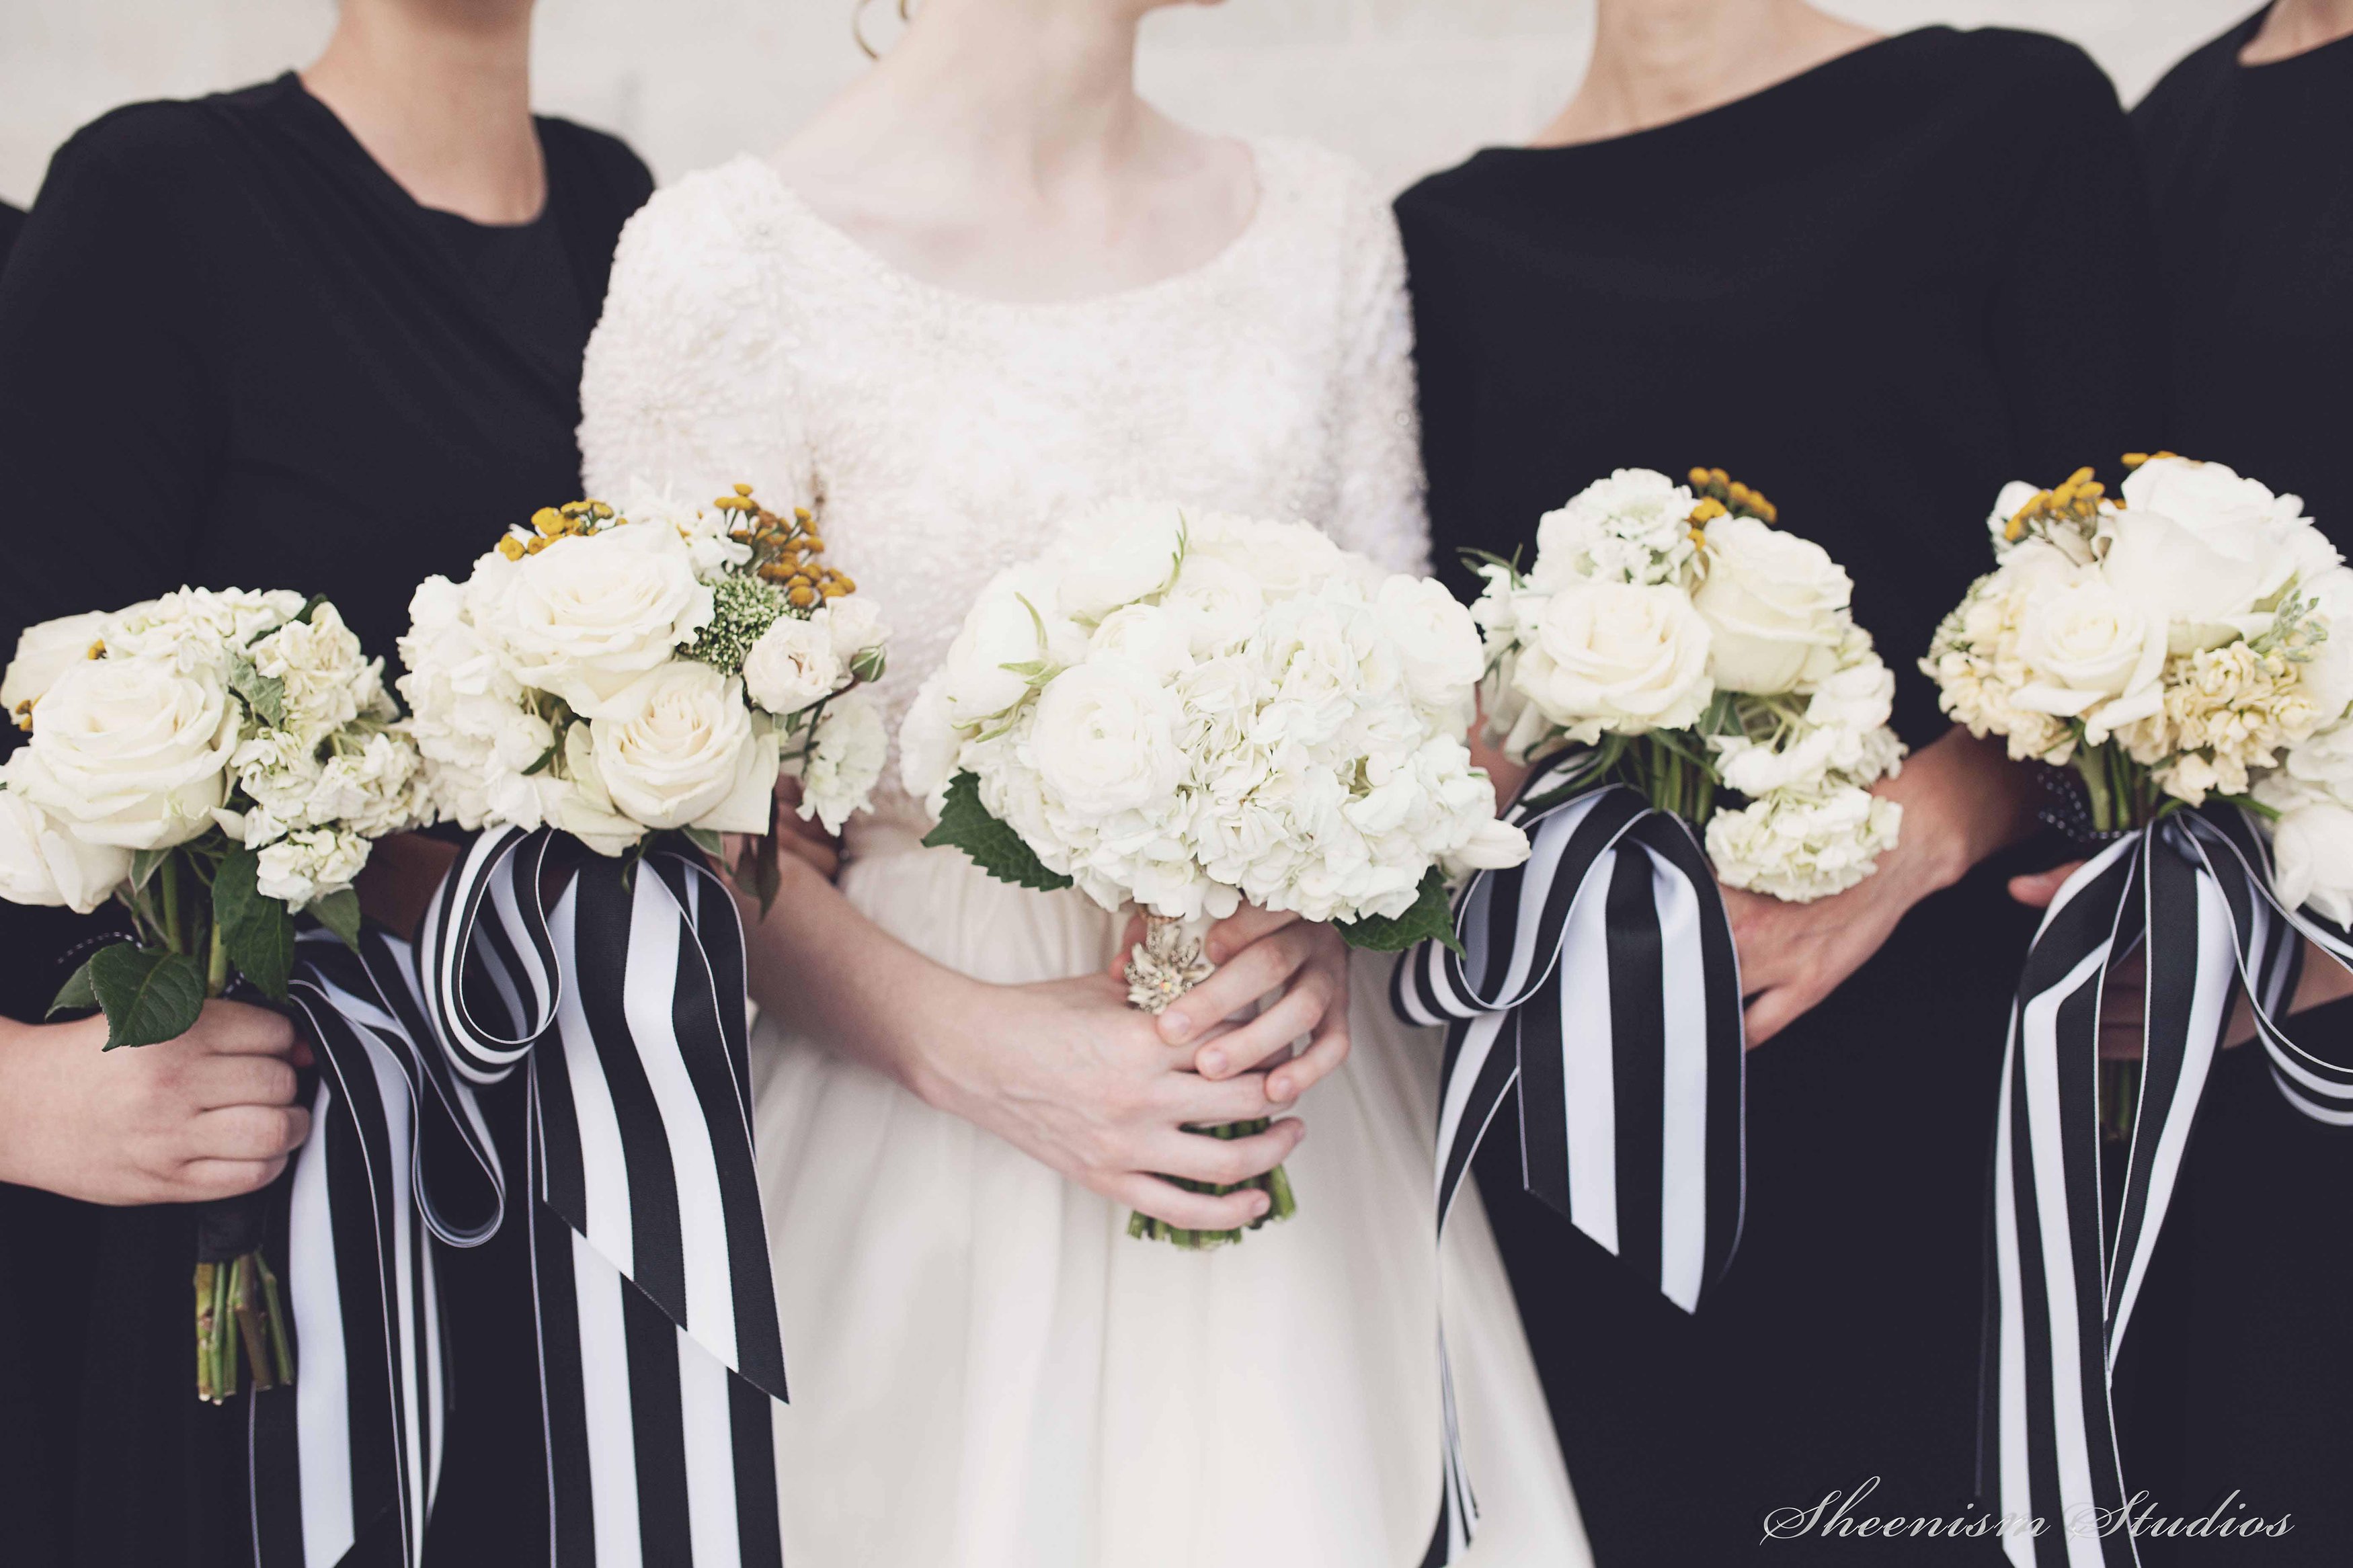 A Modern, Industrial, Canadian Wedding | Photography by Sheenism Studios